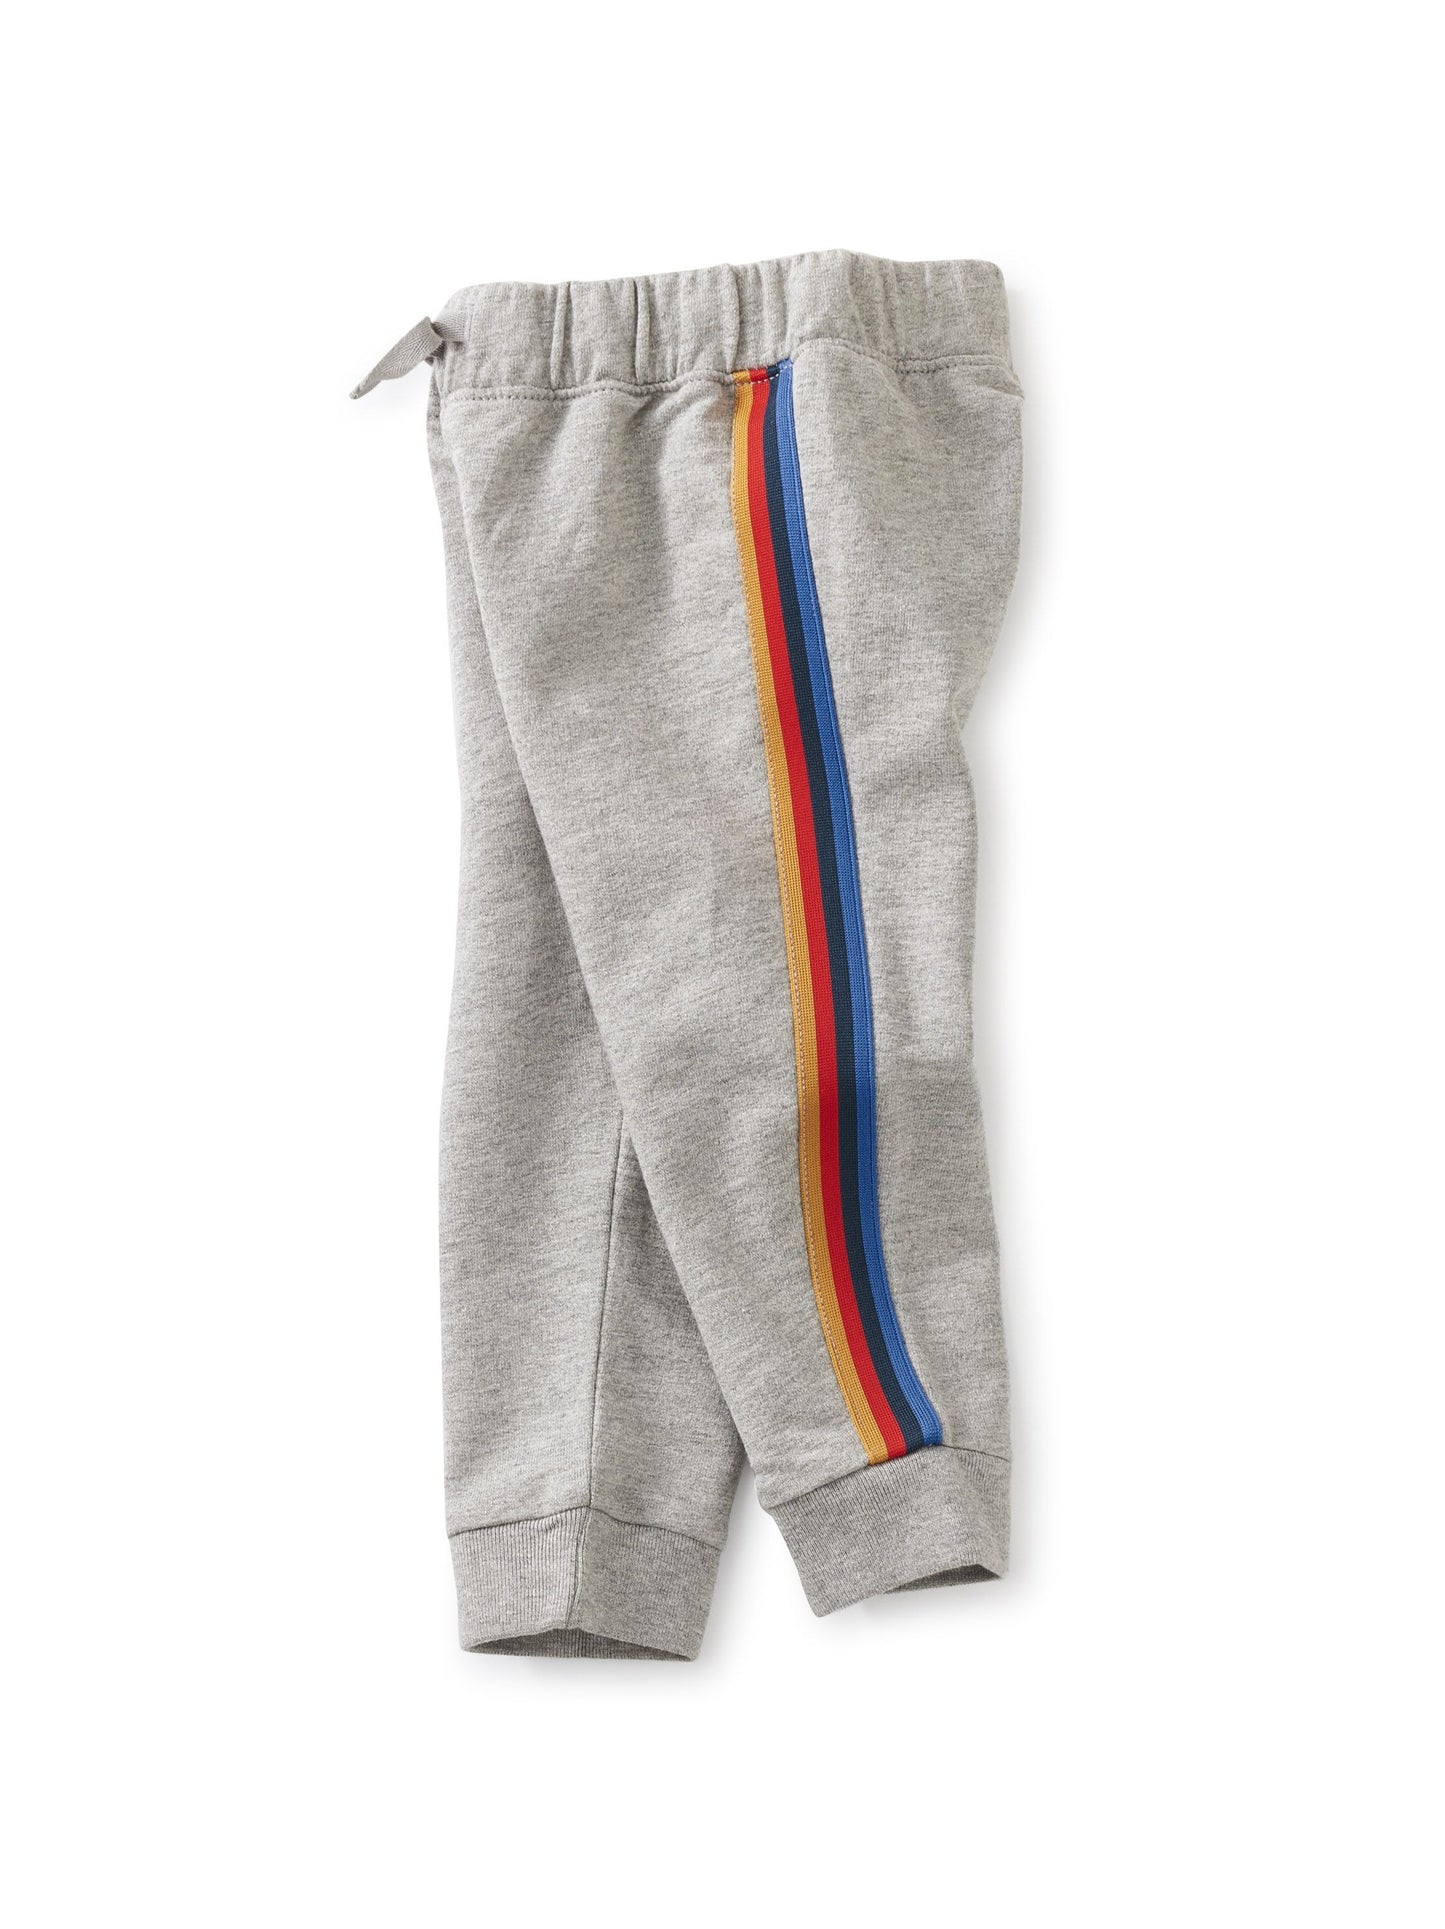 Stripe-Out Baby Jogger - Med Heather Grey